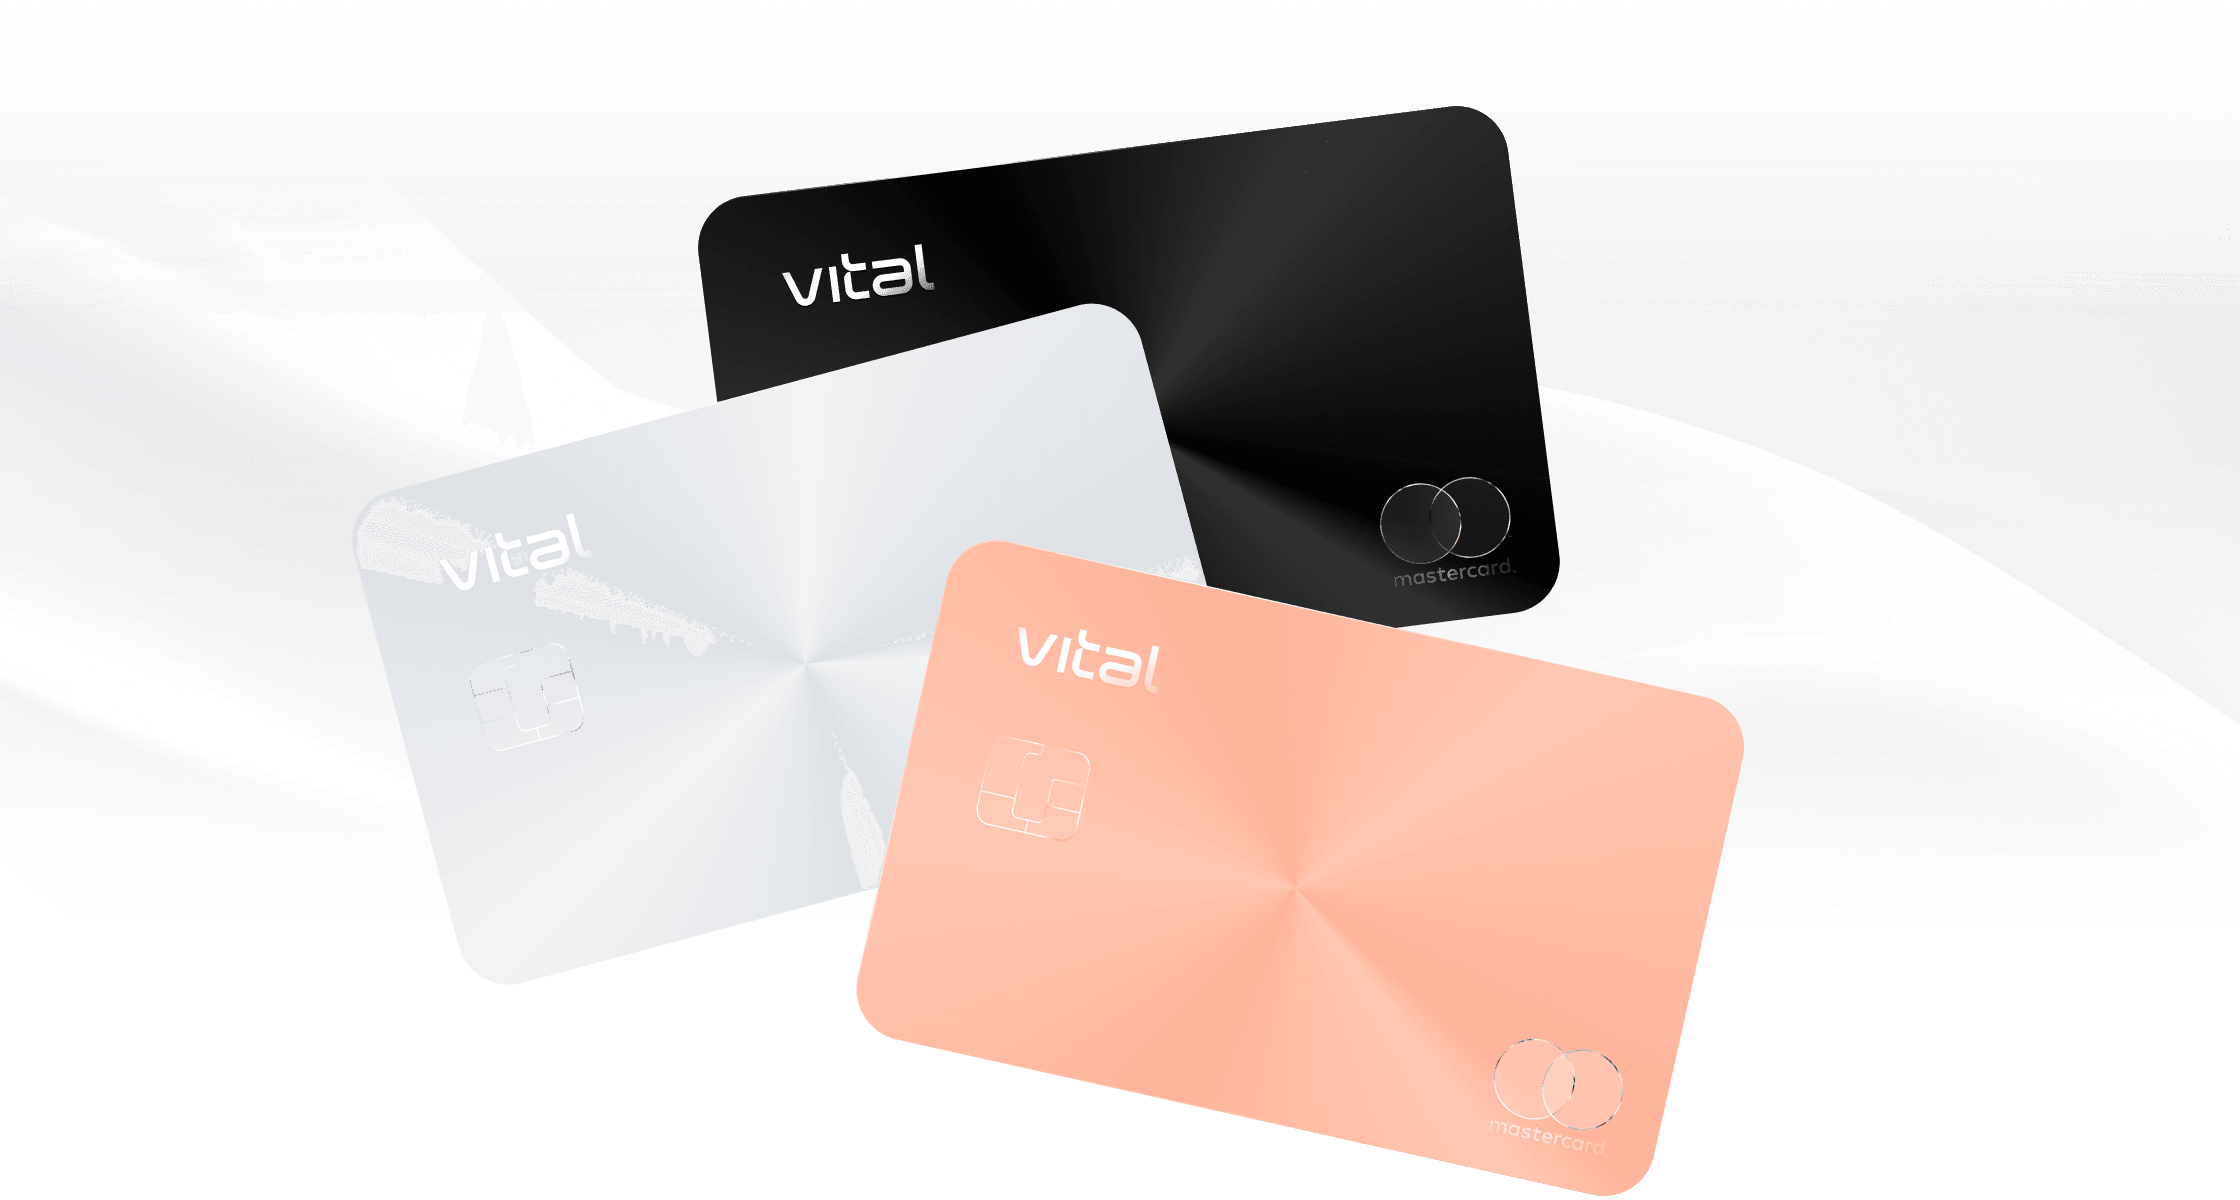 Three metal Vital Cards in three colors are staggered against a white and gray fluid background